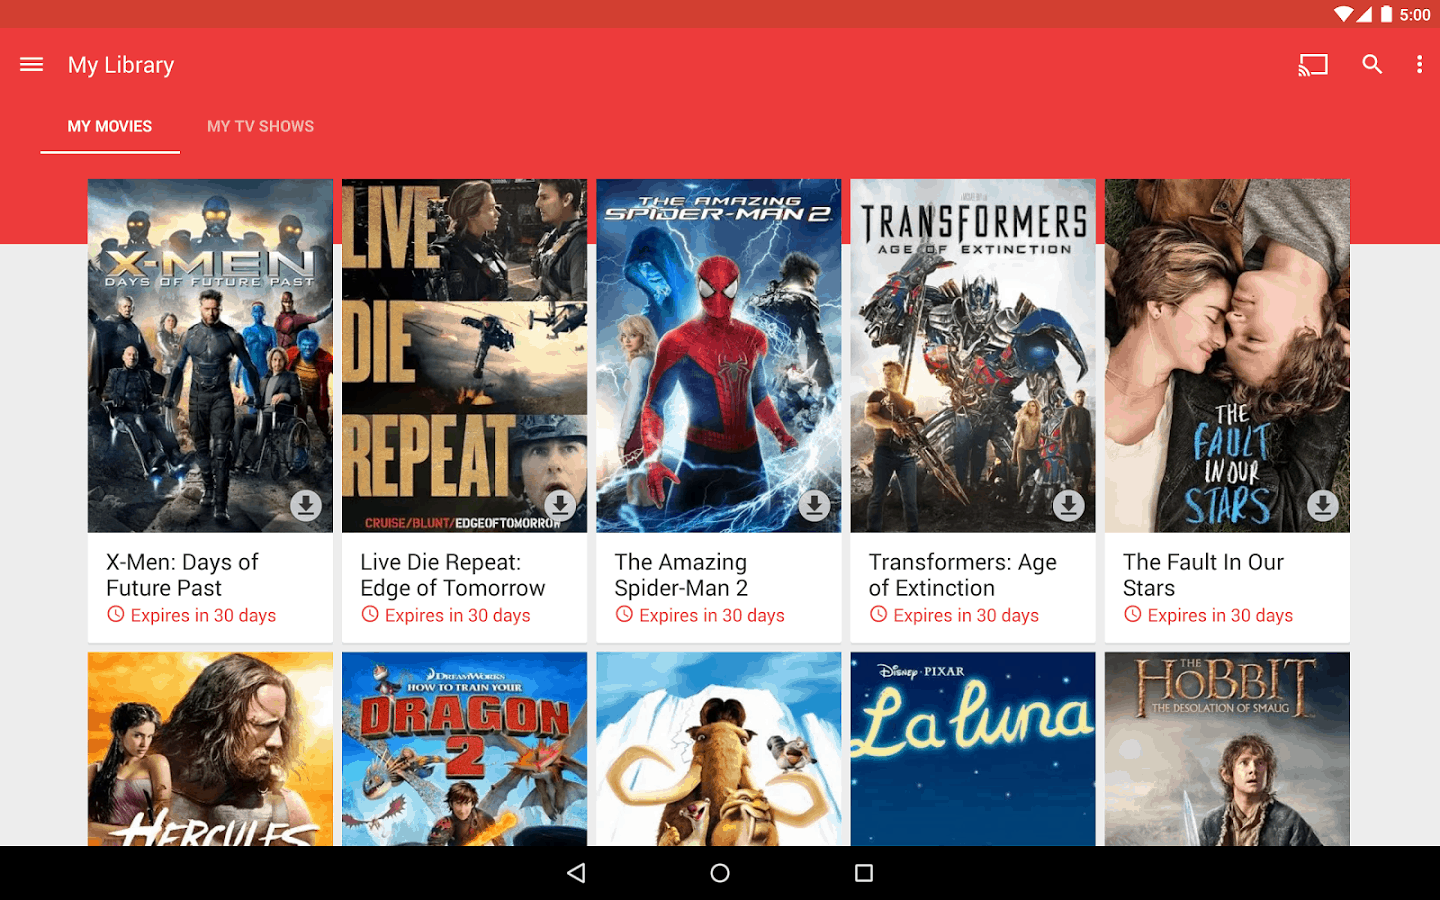 Google Play Movies - Best Way to Watch Movies